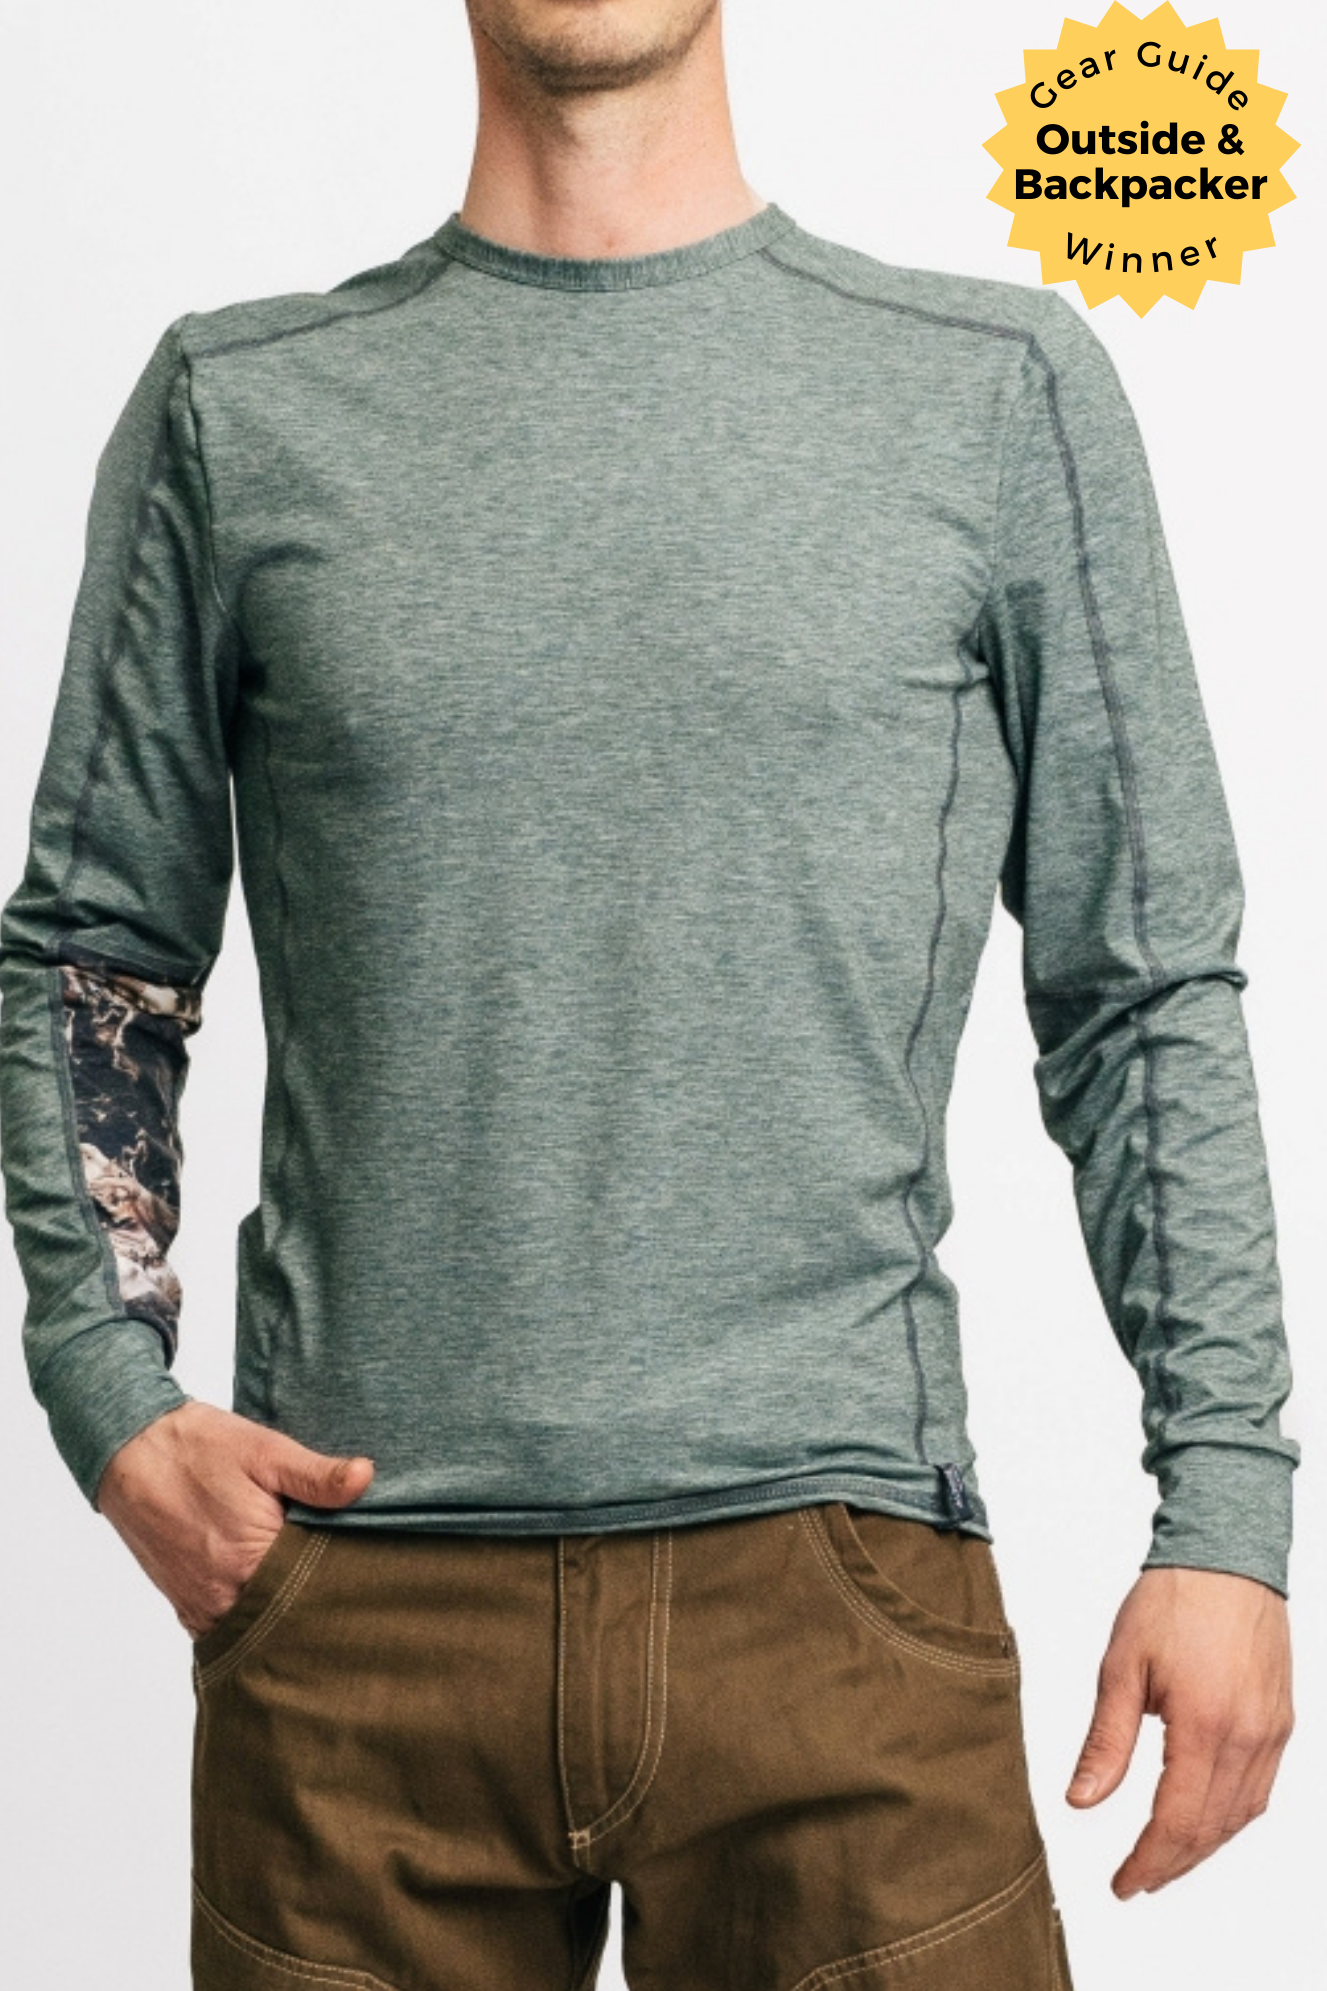 Men's Long Sleeve T-Shirts, Long Sleeve Tops for Me